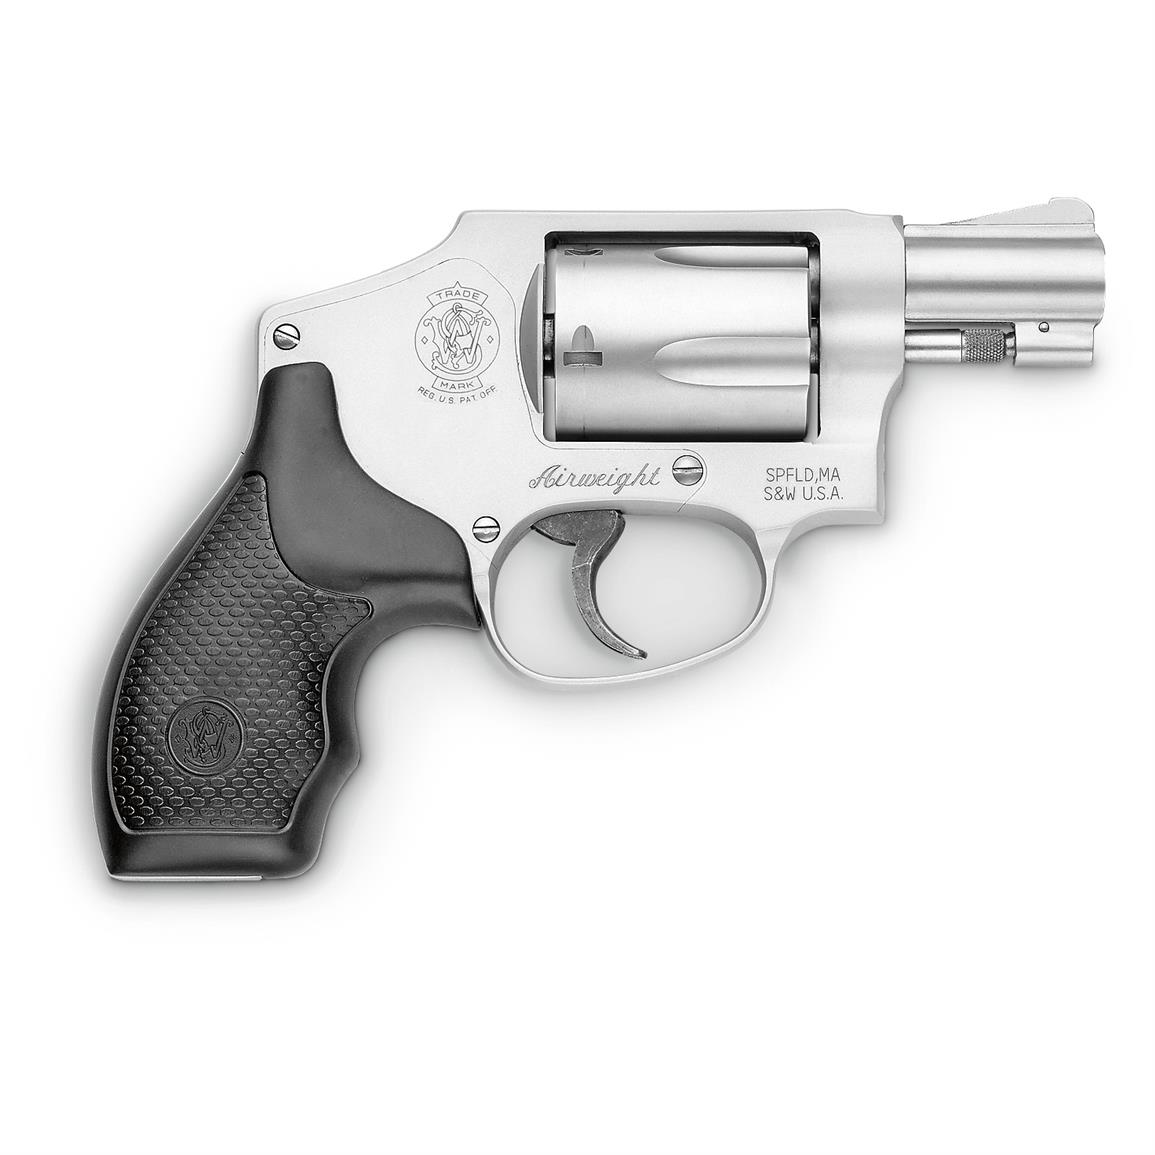 Smith and Wesson Revolver - click or tap to browse Firearms from Coastal 